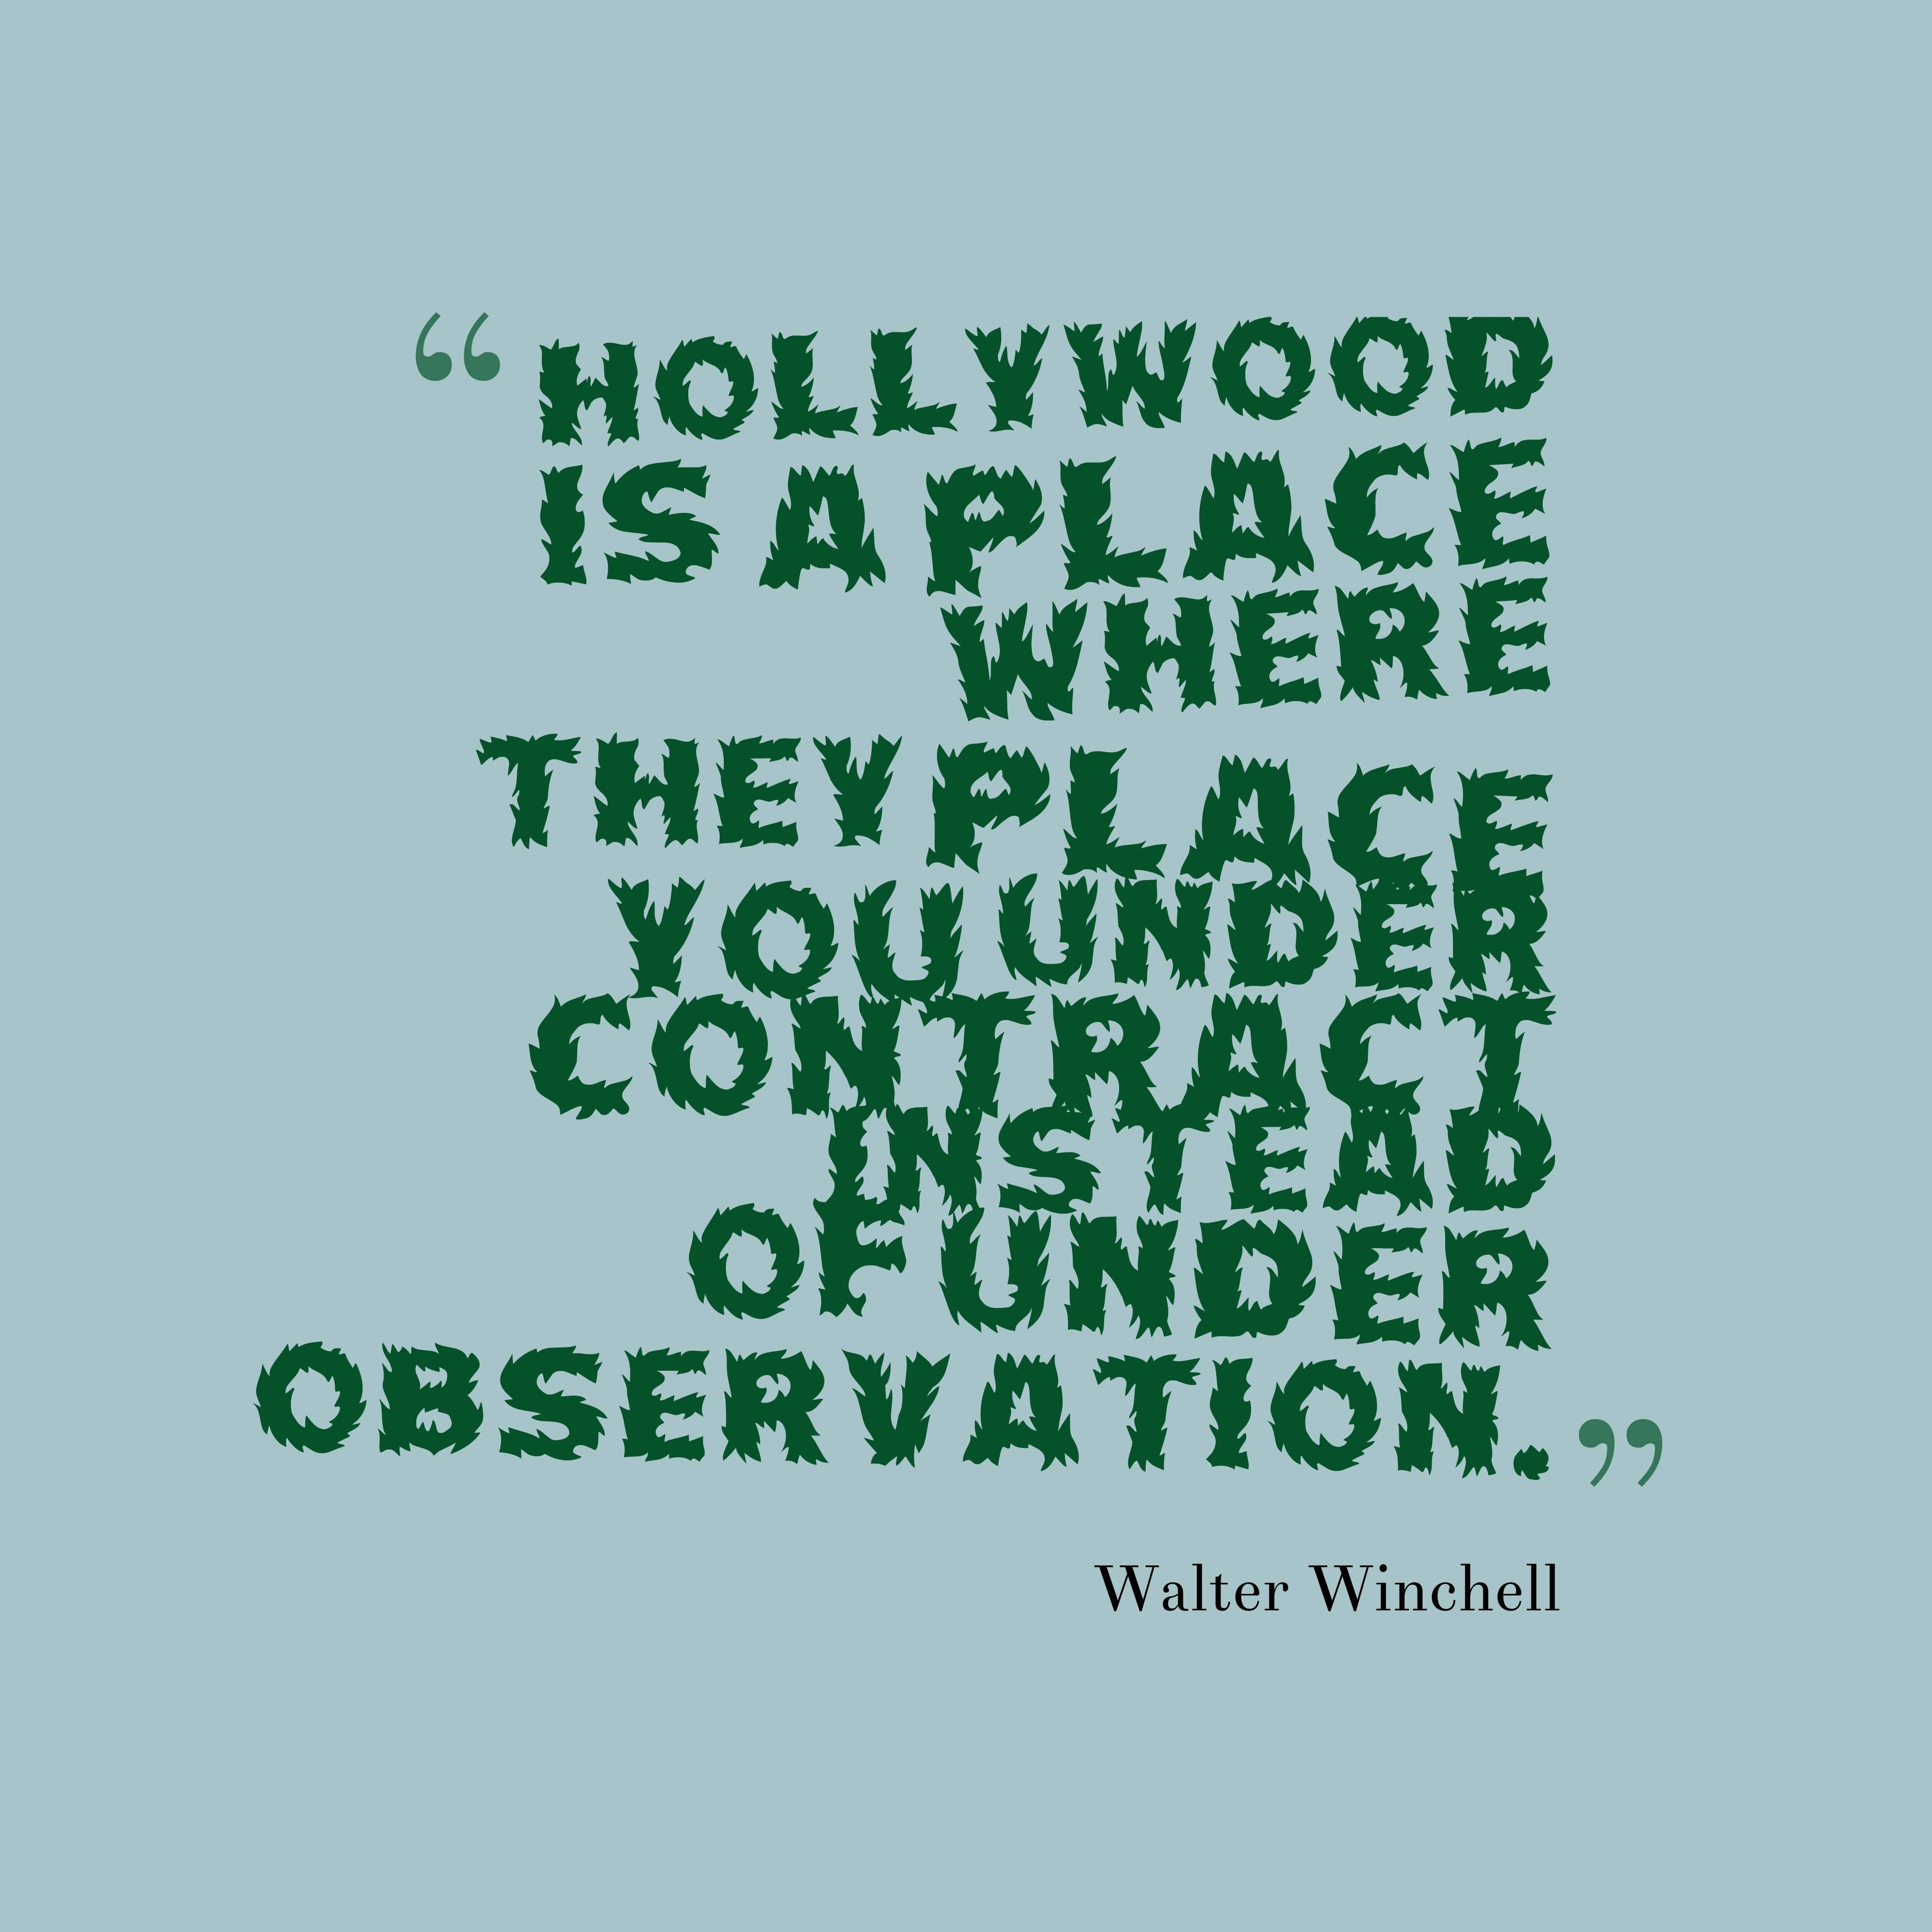 Hollywood is a place where they place you under contract instead of under observation. Walter Winchell